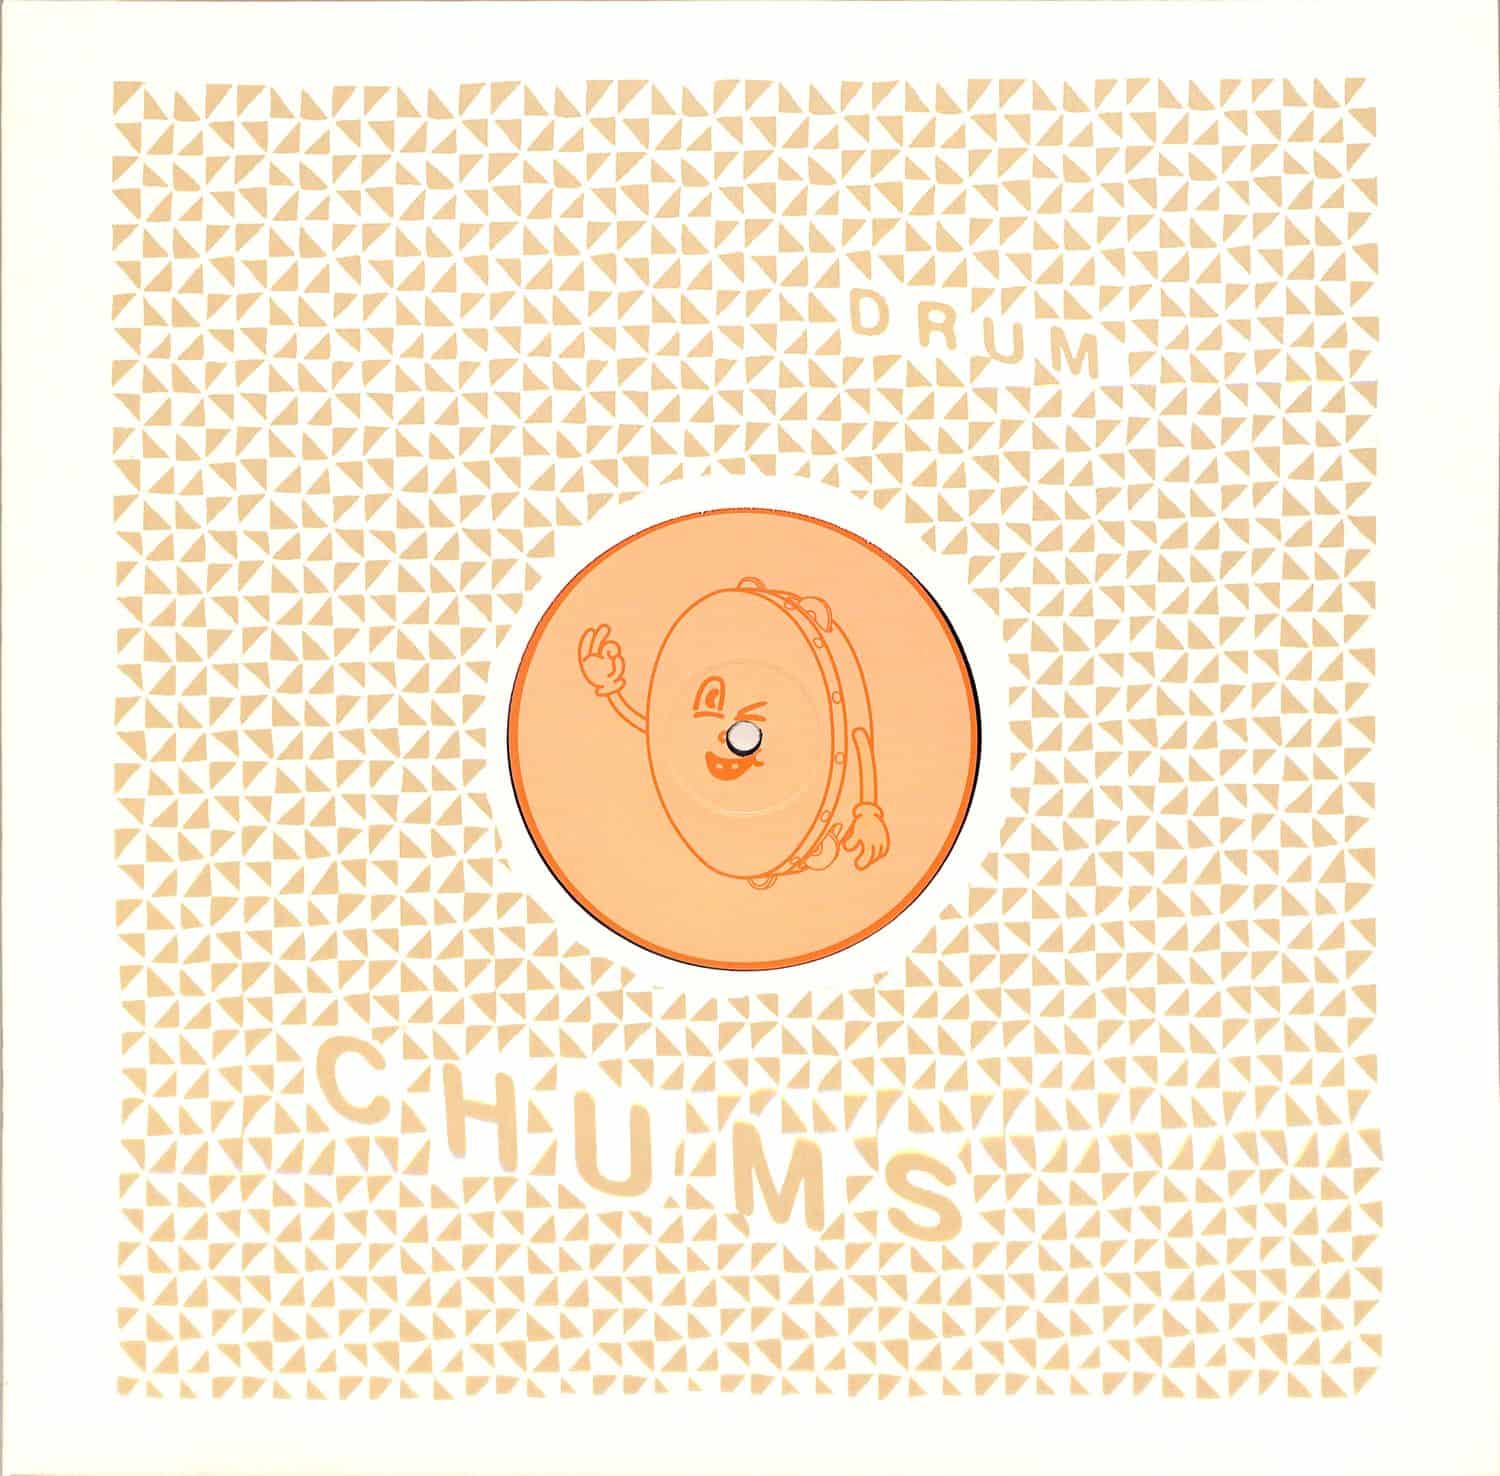 Approach Release - DRUM CHUMS VOL.4